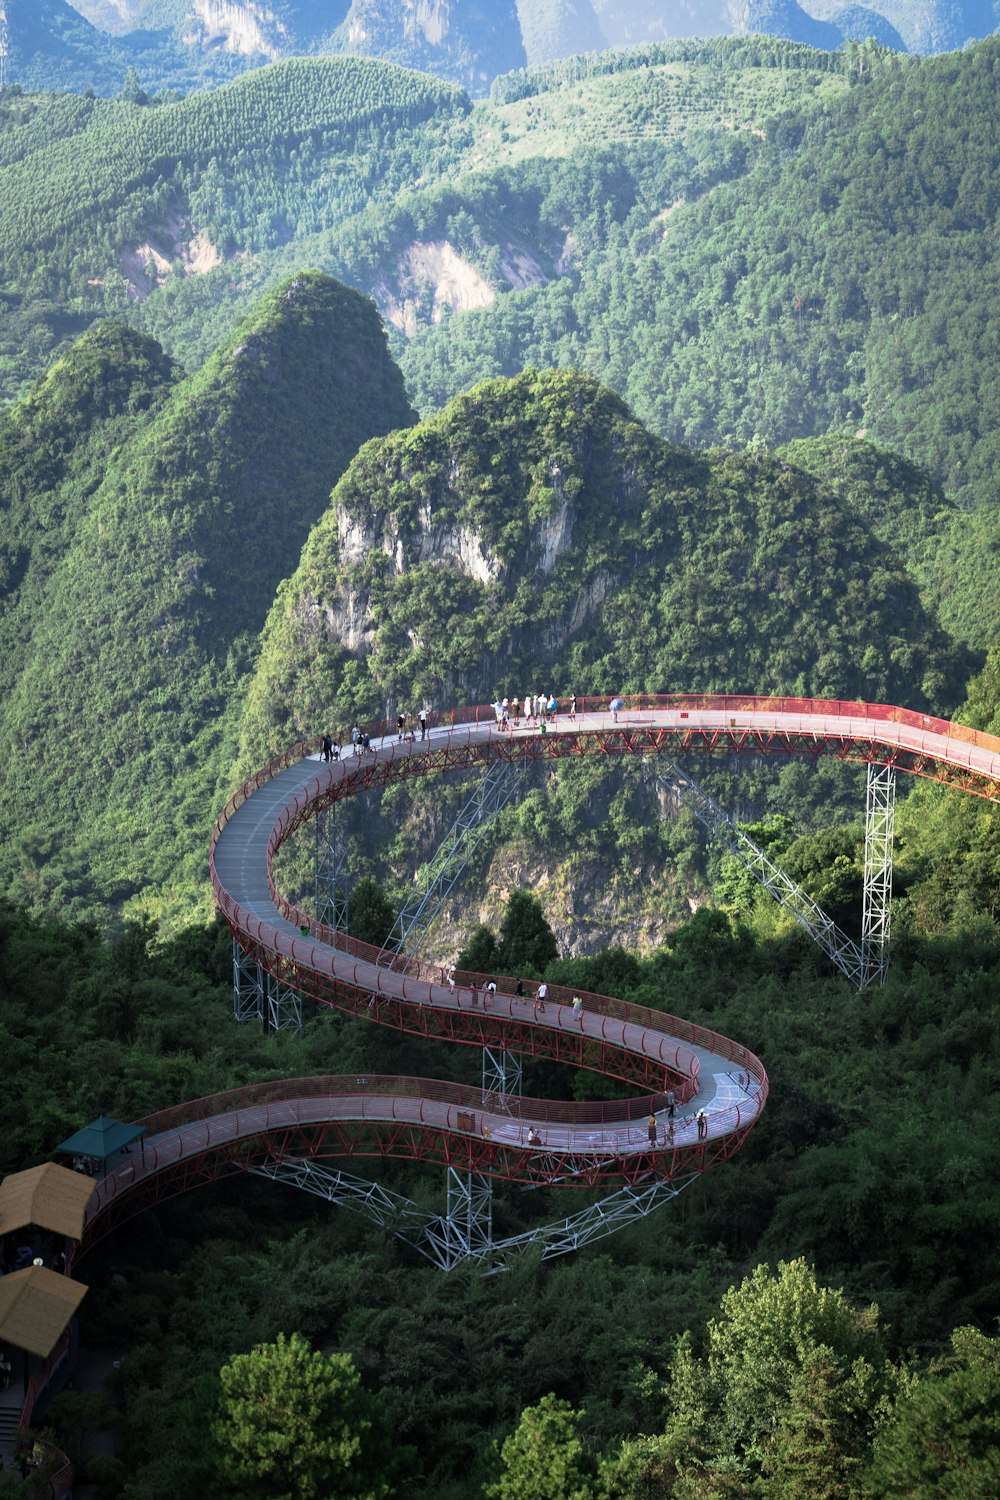 red and white roller coaster